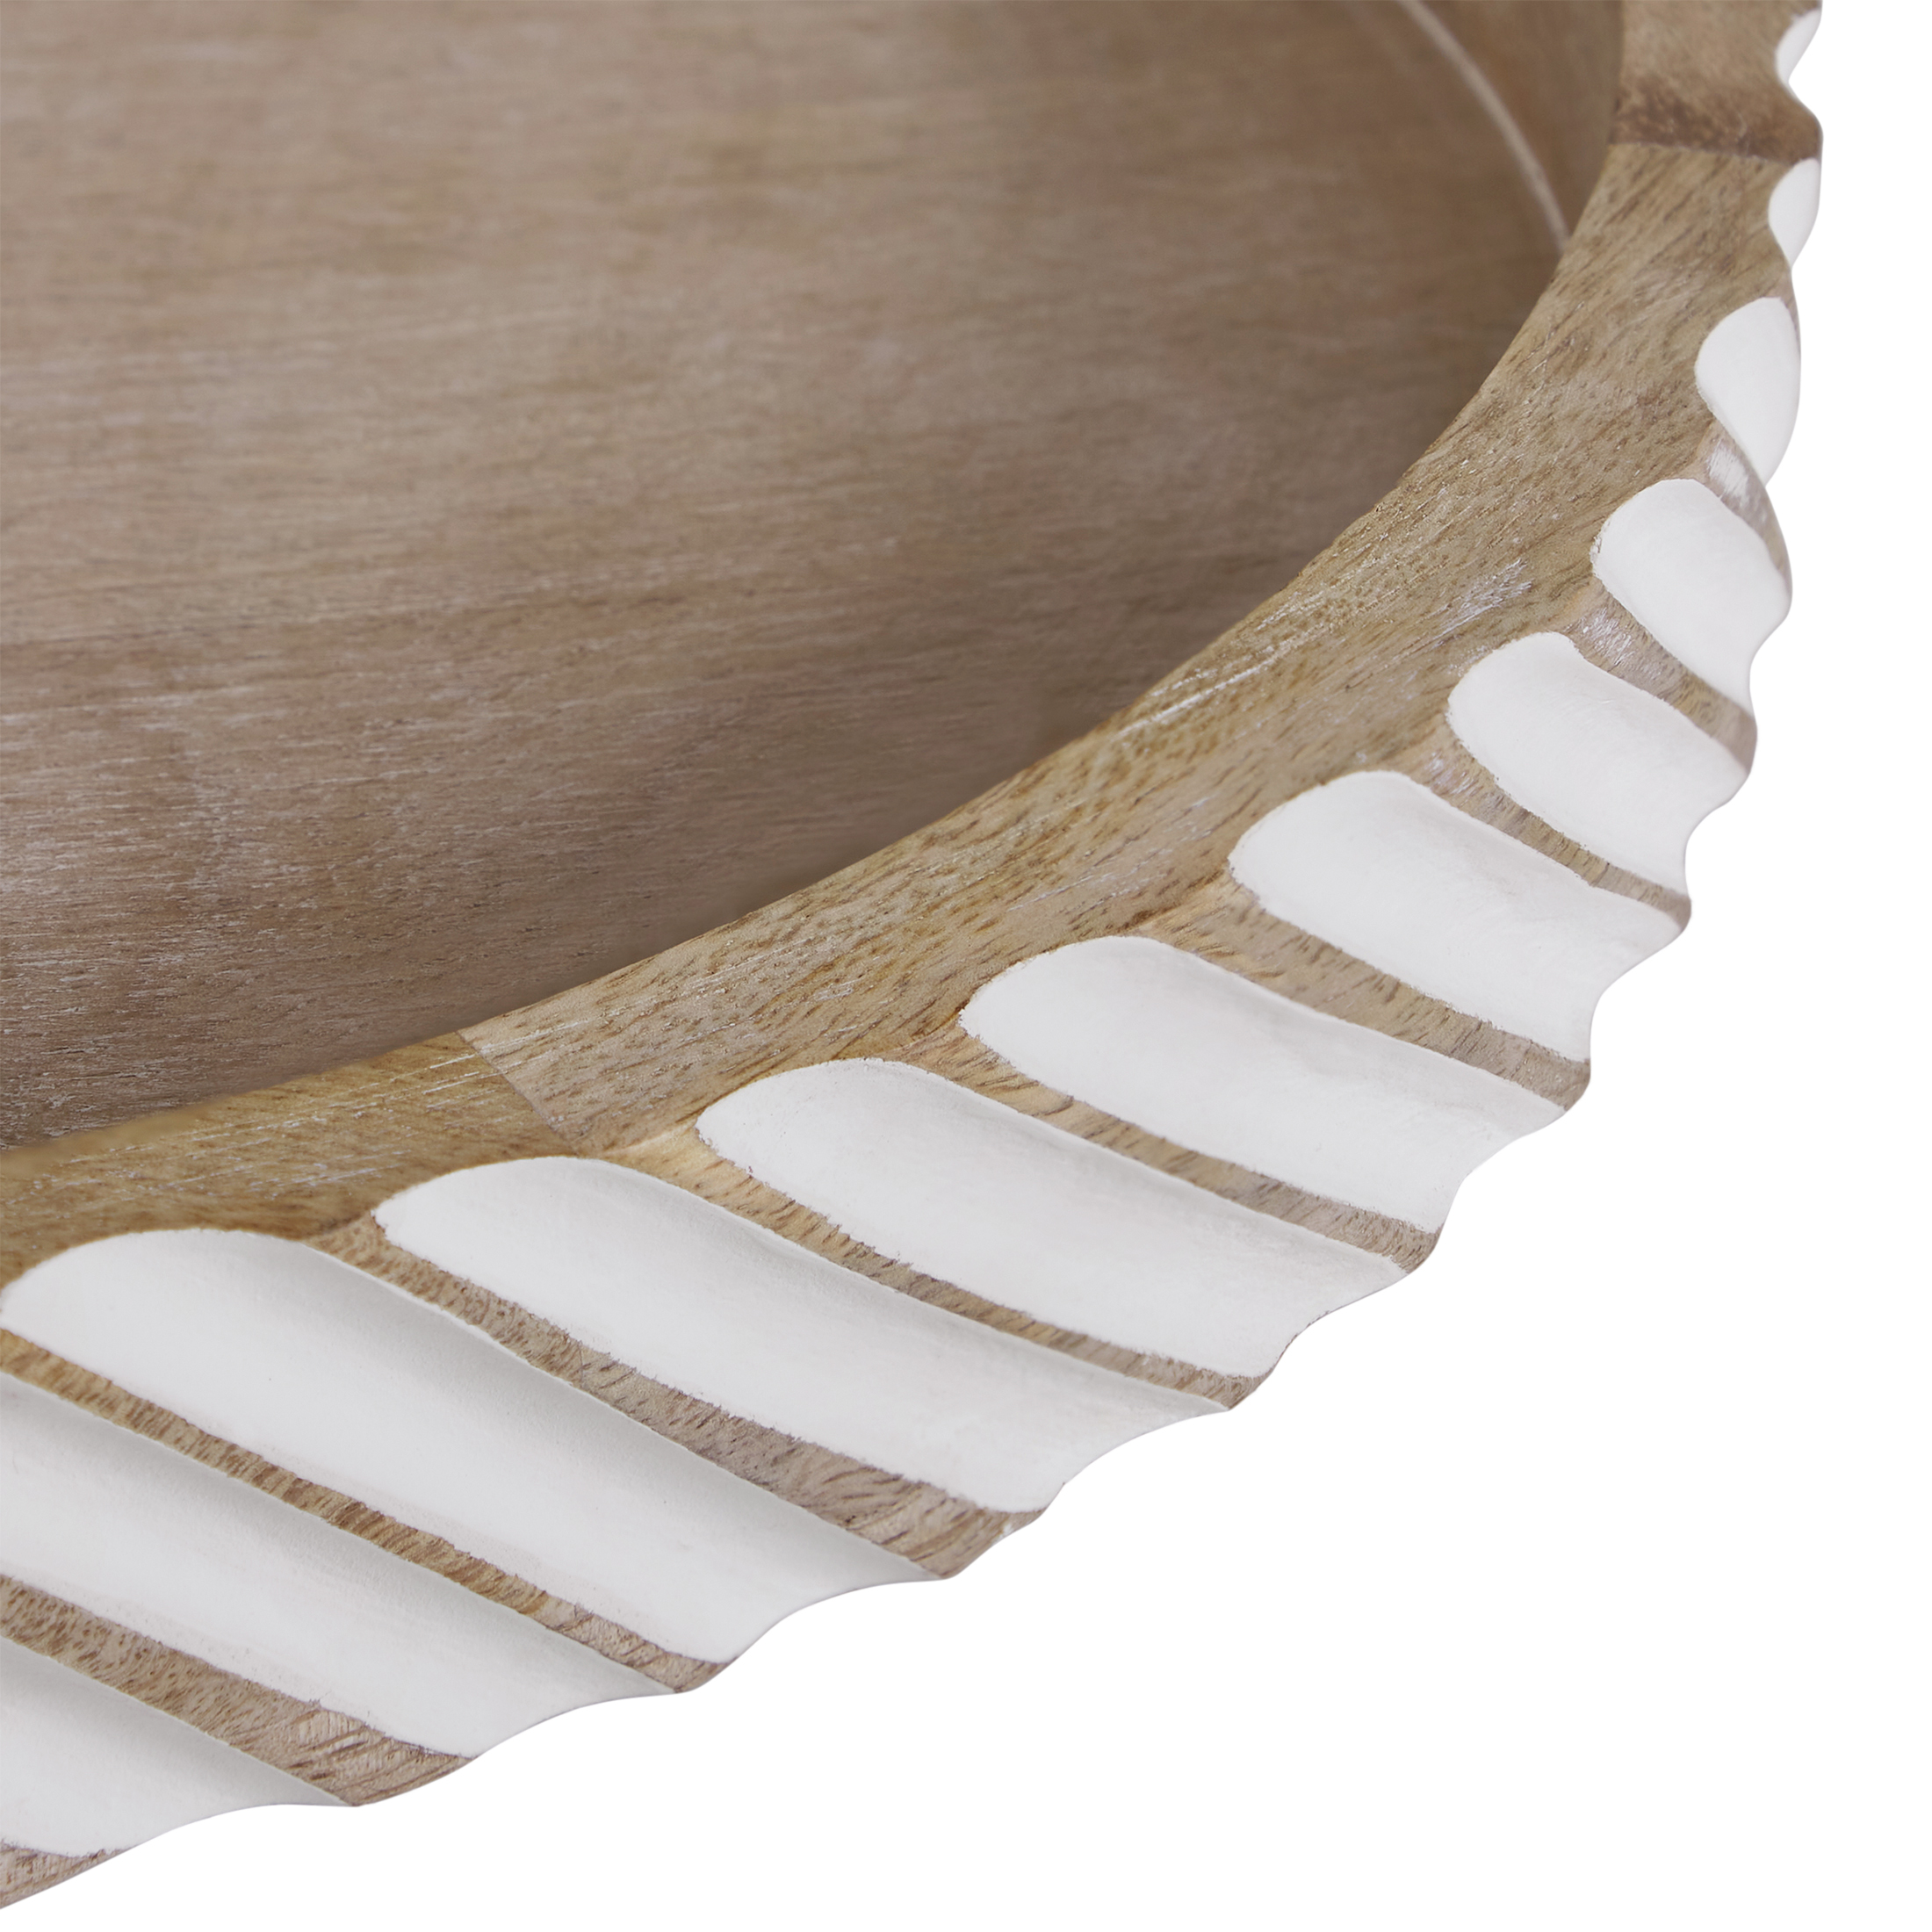 My Texas House 16" Natural White Diagonal Round Wood Decorative Tray - image 4 of 5